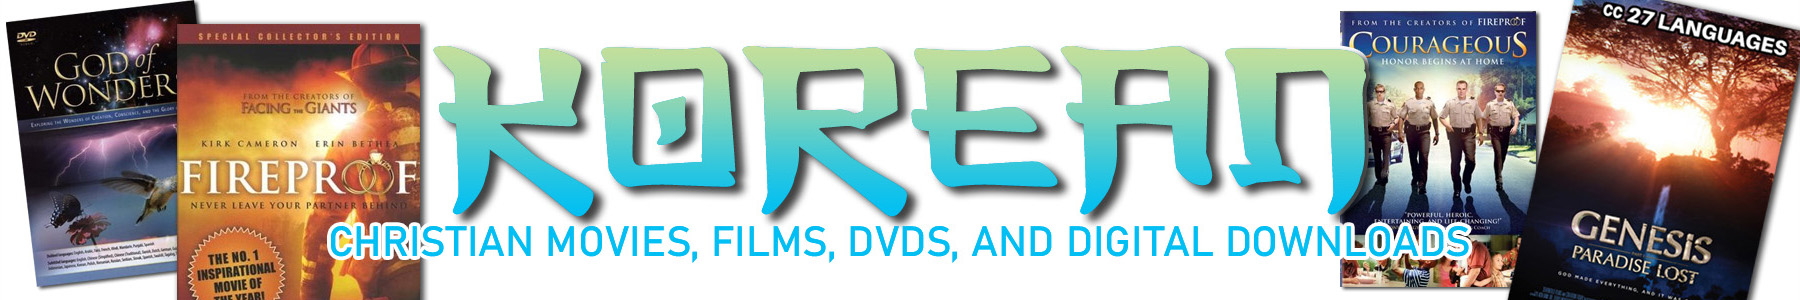 Watch Christian Movies and Films Online Free in Hundreds of Languages